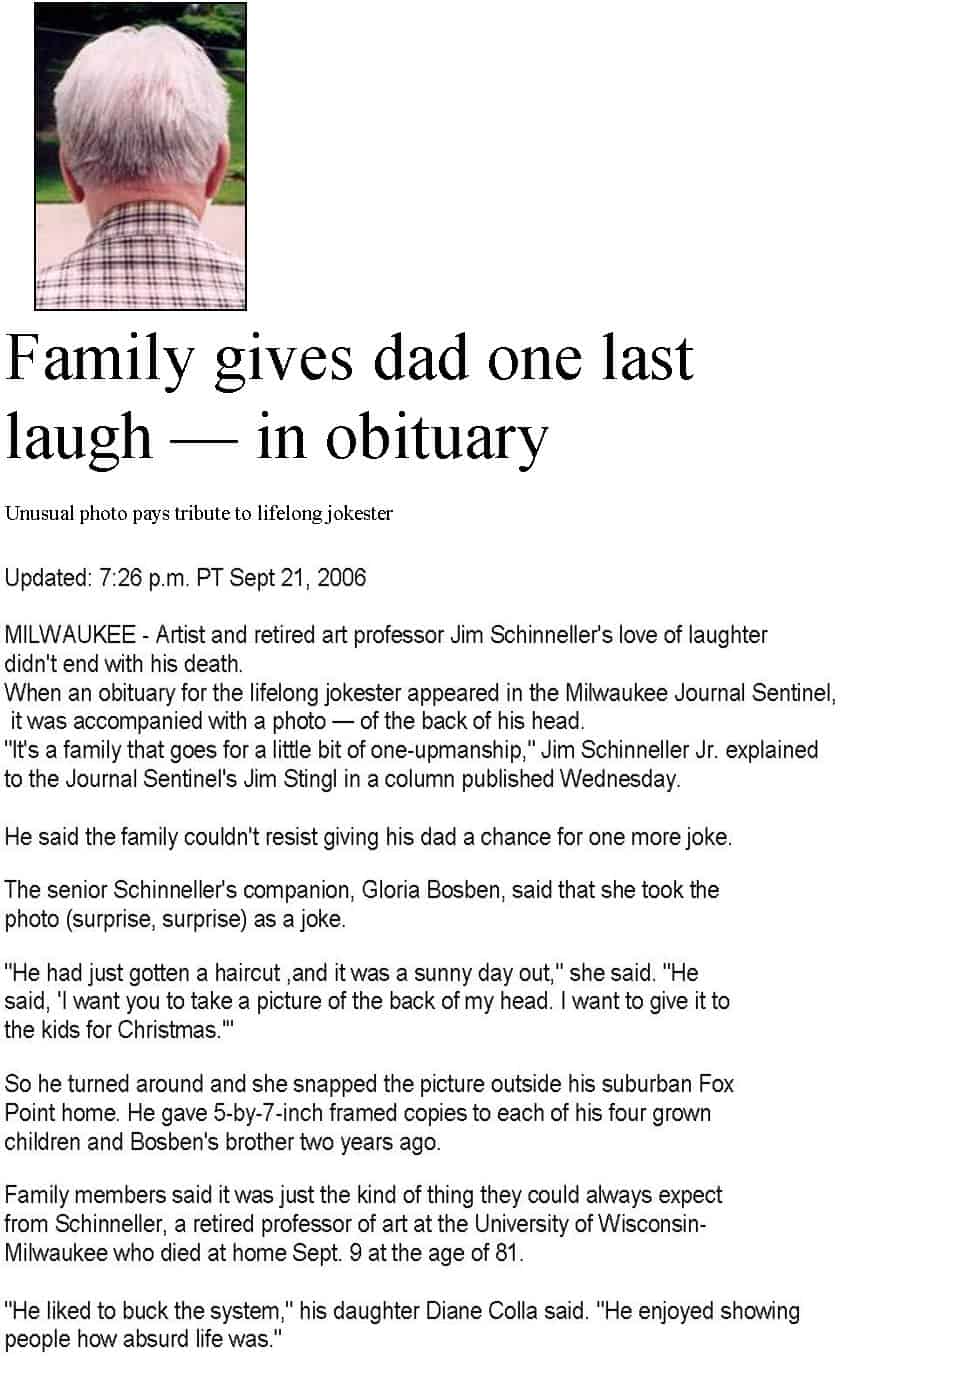 Article about Creative Obituary